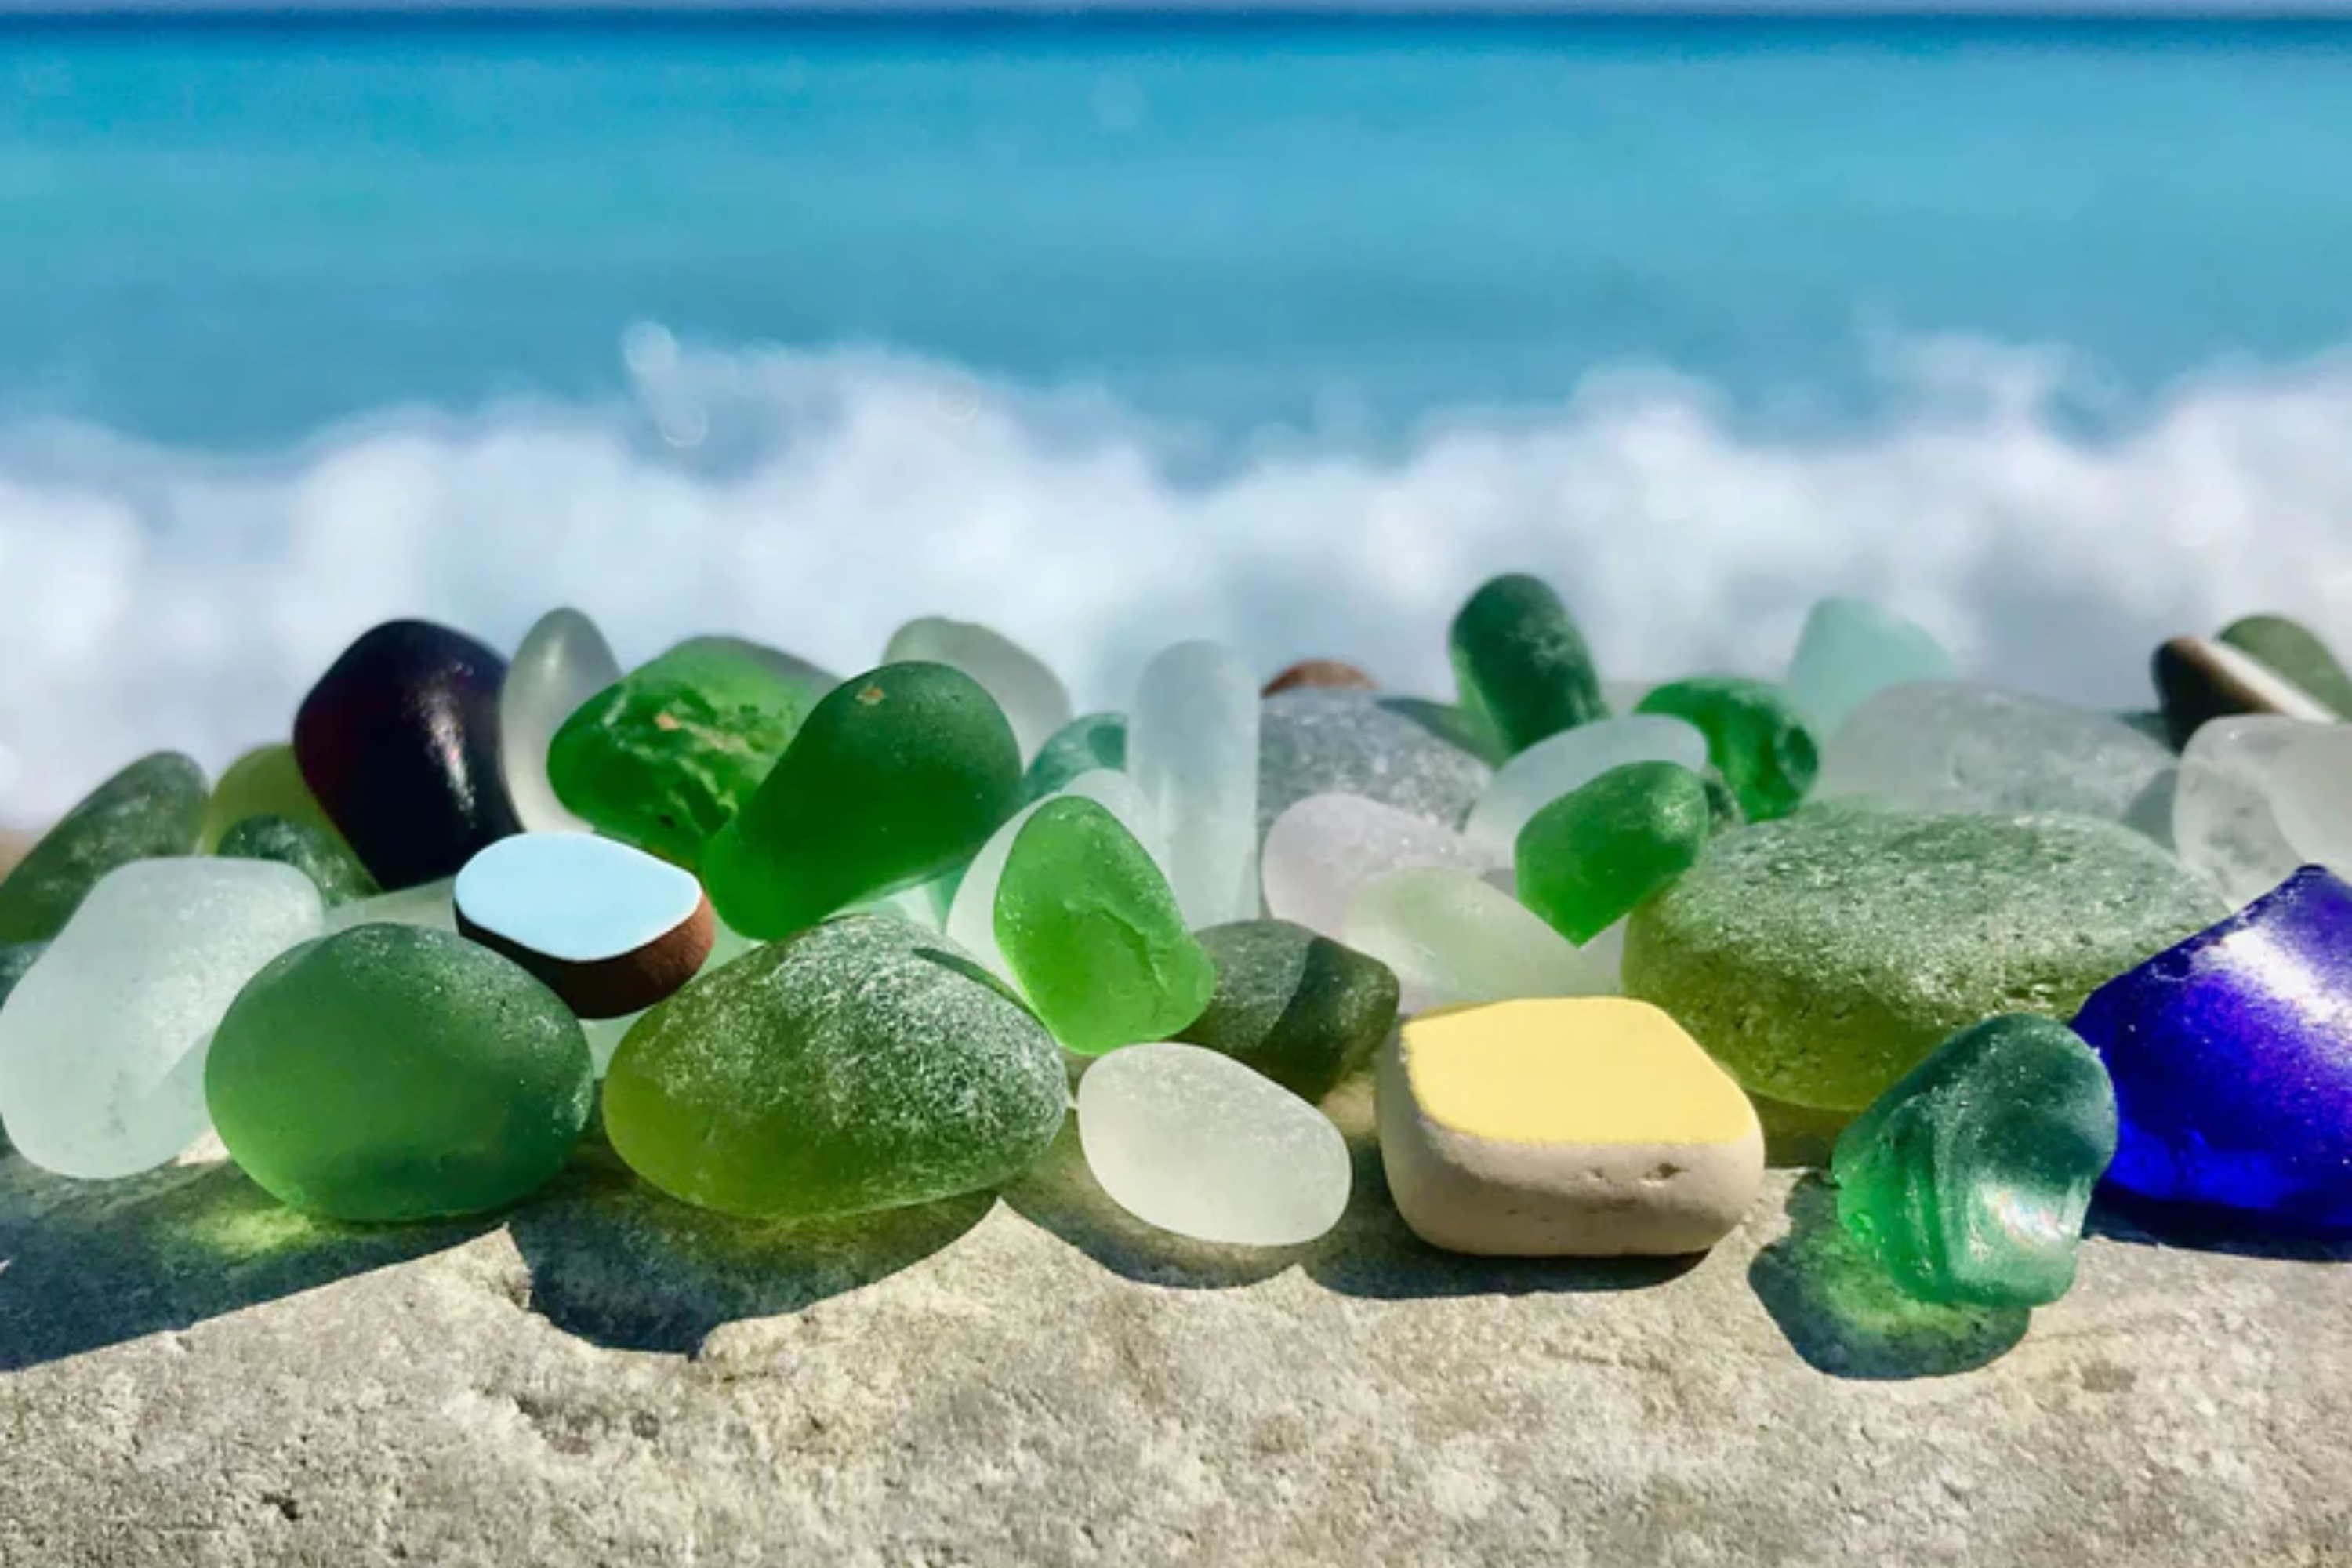 Seaglass on beach with sea in background.